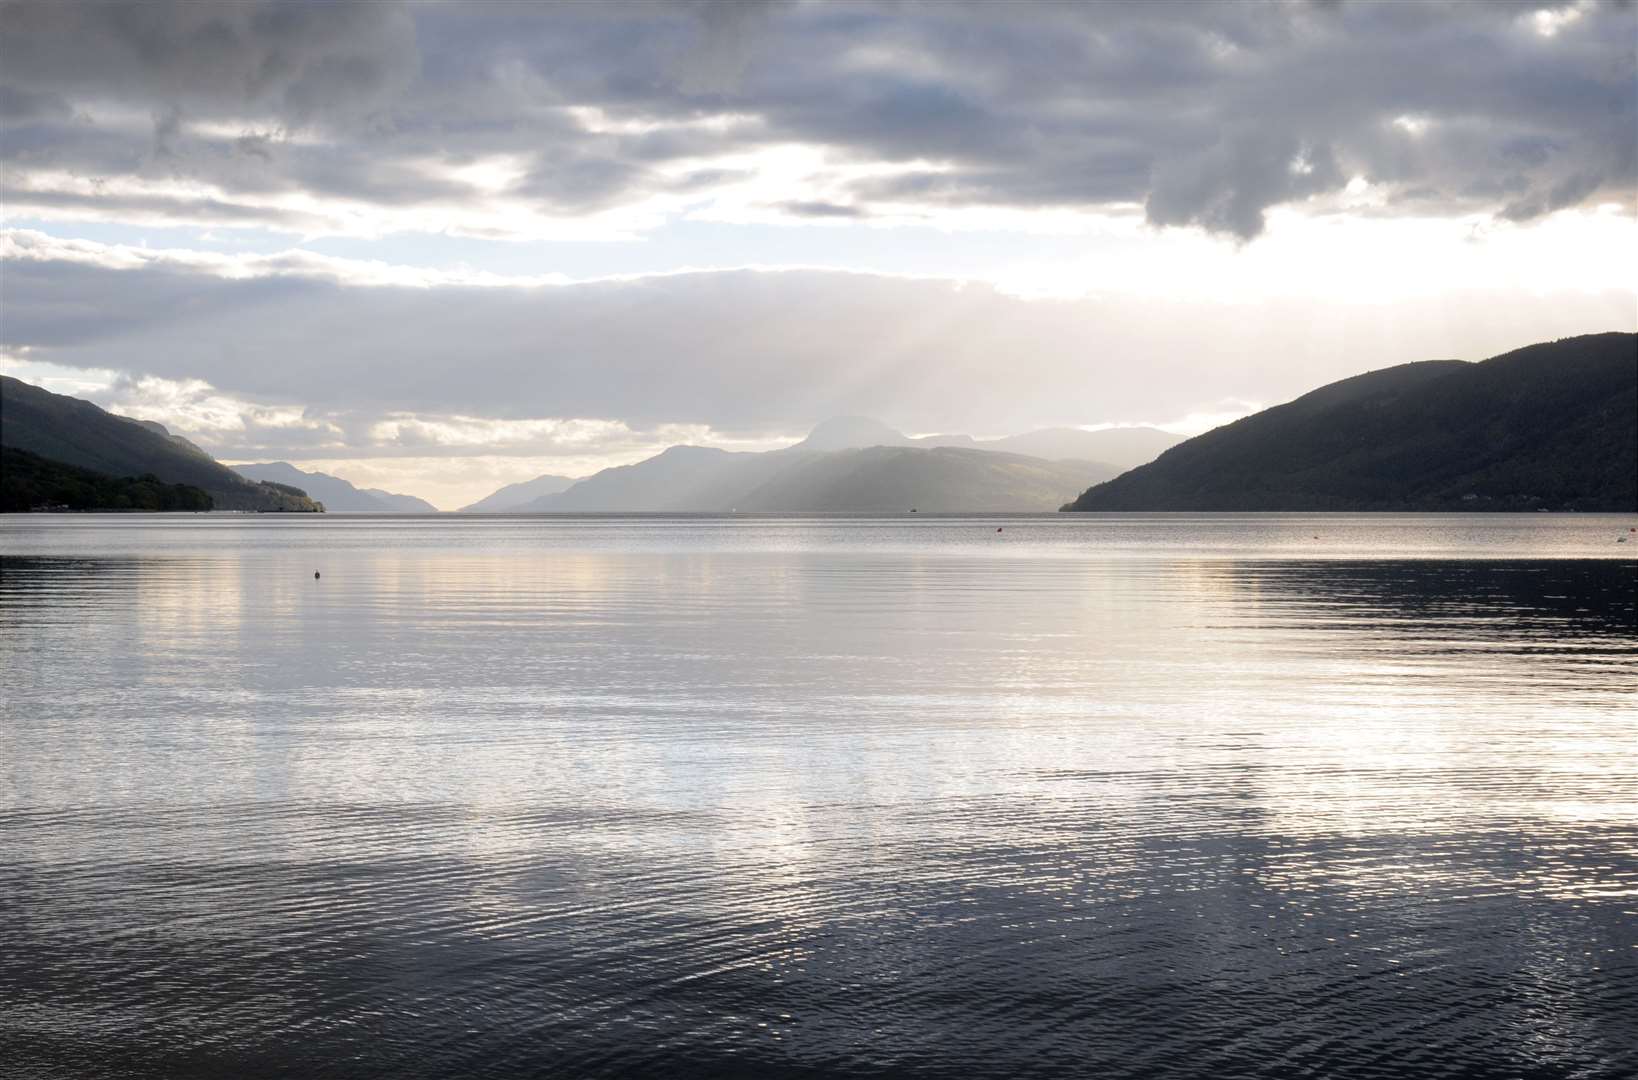 The world-famous view of Loch Ness from Dores was voted sixth best view in Britain in a poll in 2017.